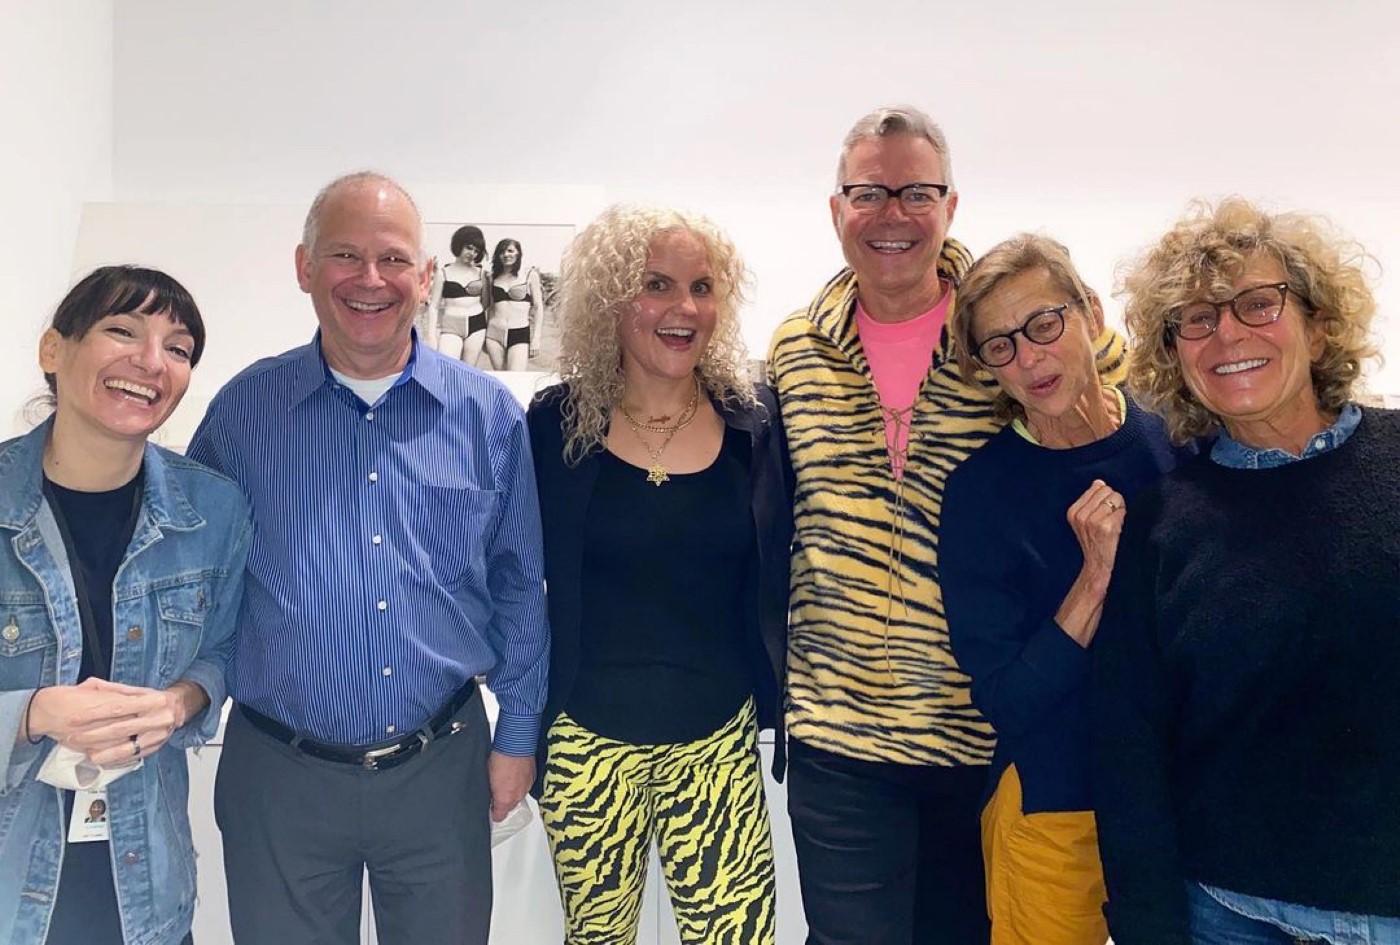 Left to right: Curators Lisa Volpe and Malcolm Daniel, Jennifer Greenburg, Paige Ramey and Barbara Levine